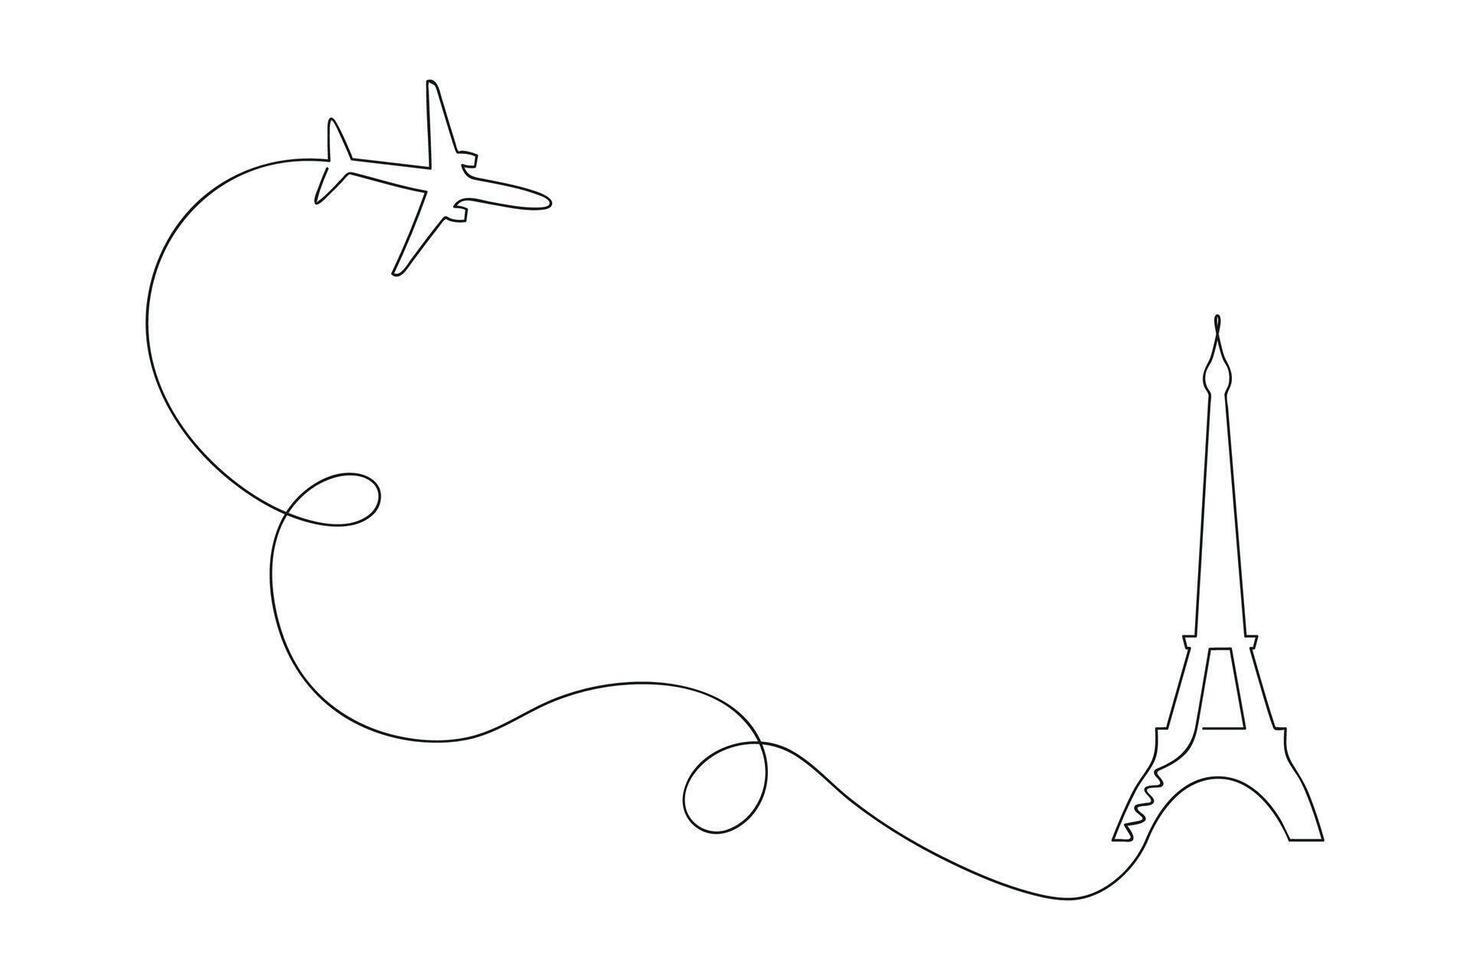 Plane to Paris drawn in one continuous line. One line drawing, minimalism. Vector illustration.